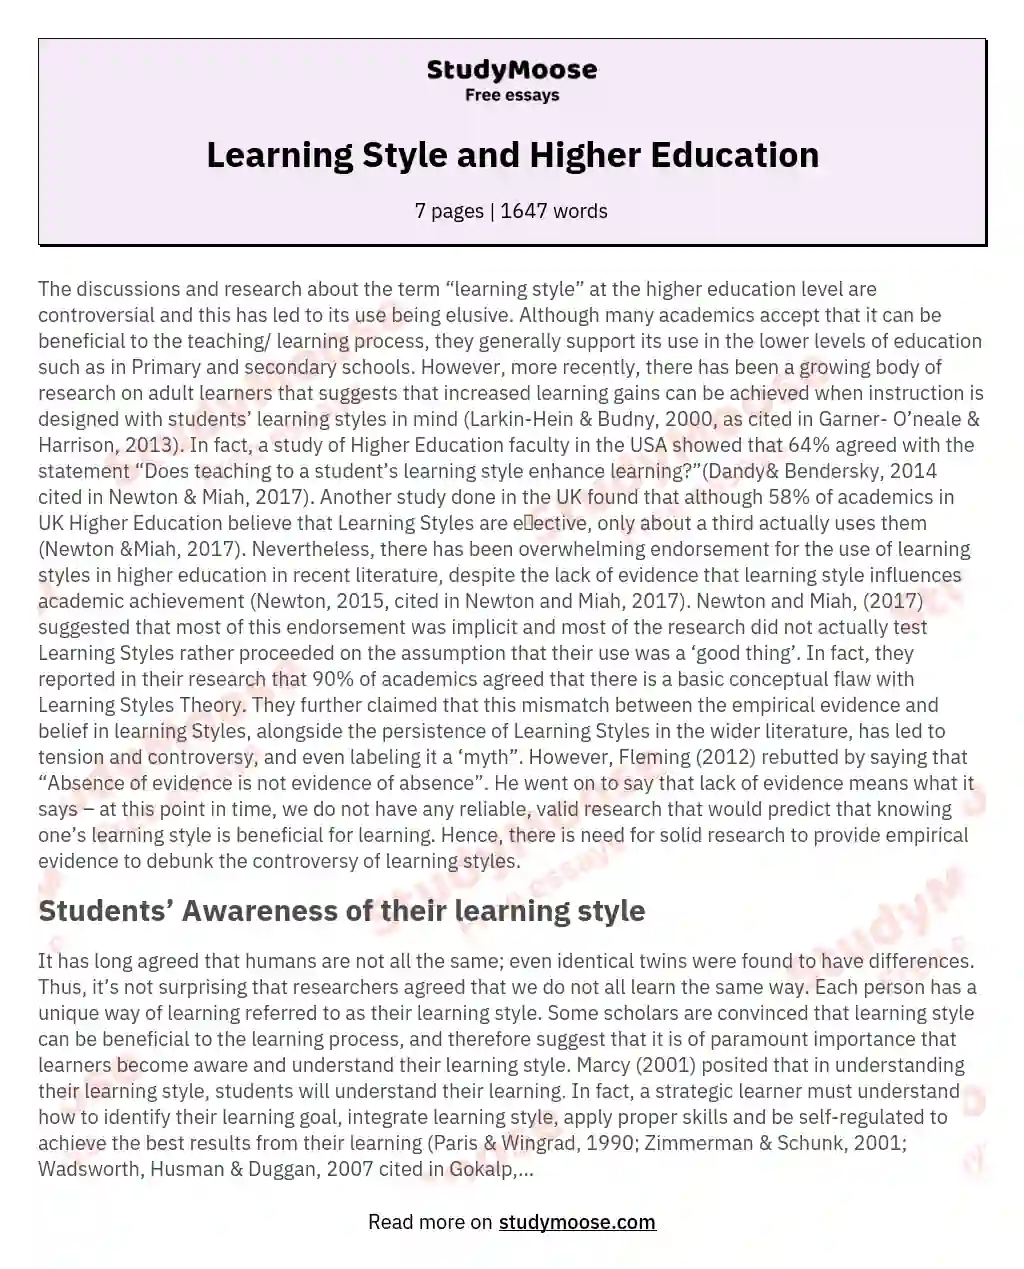 Learning Style and Higher Education